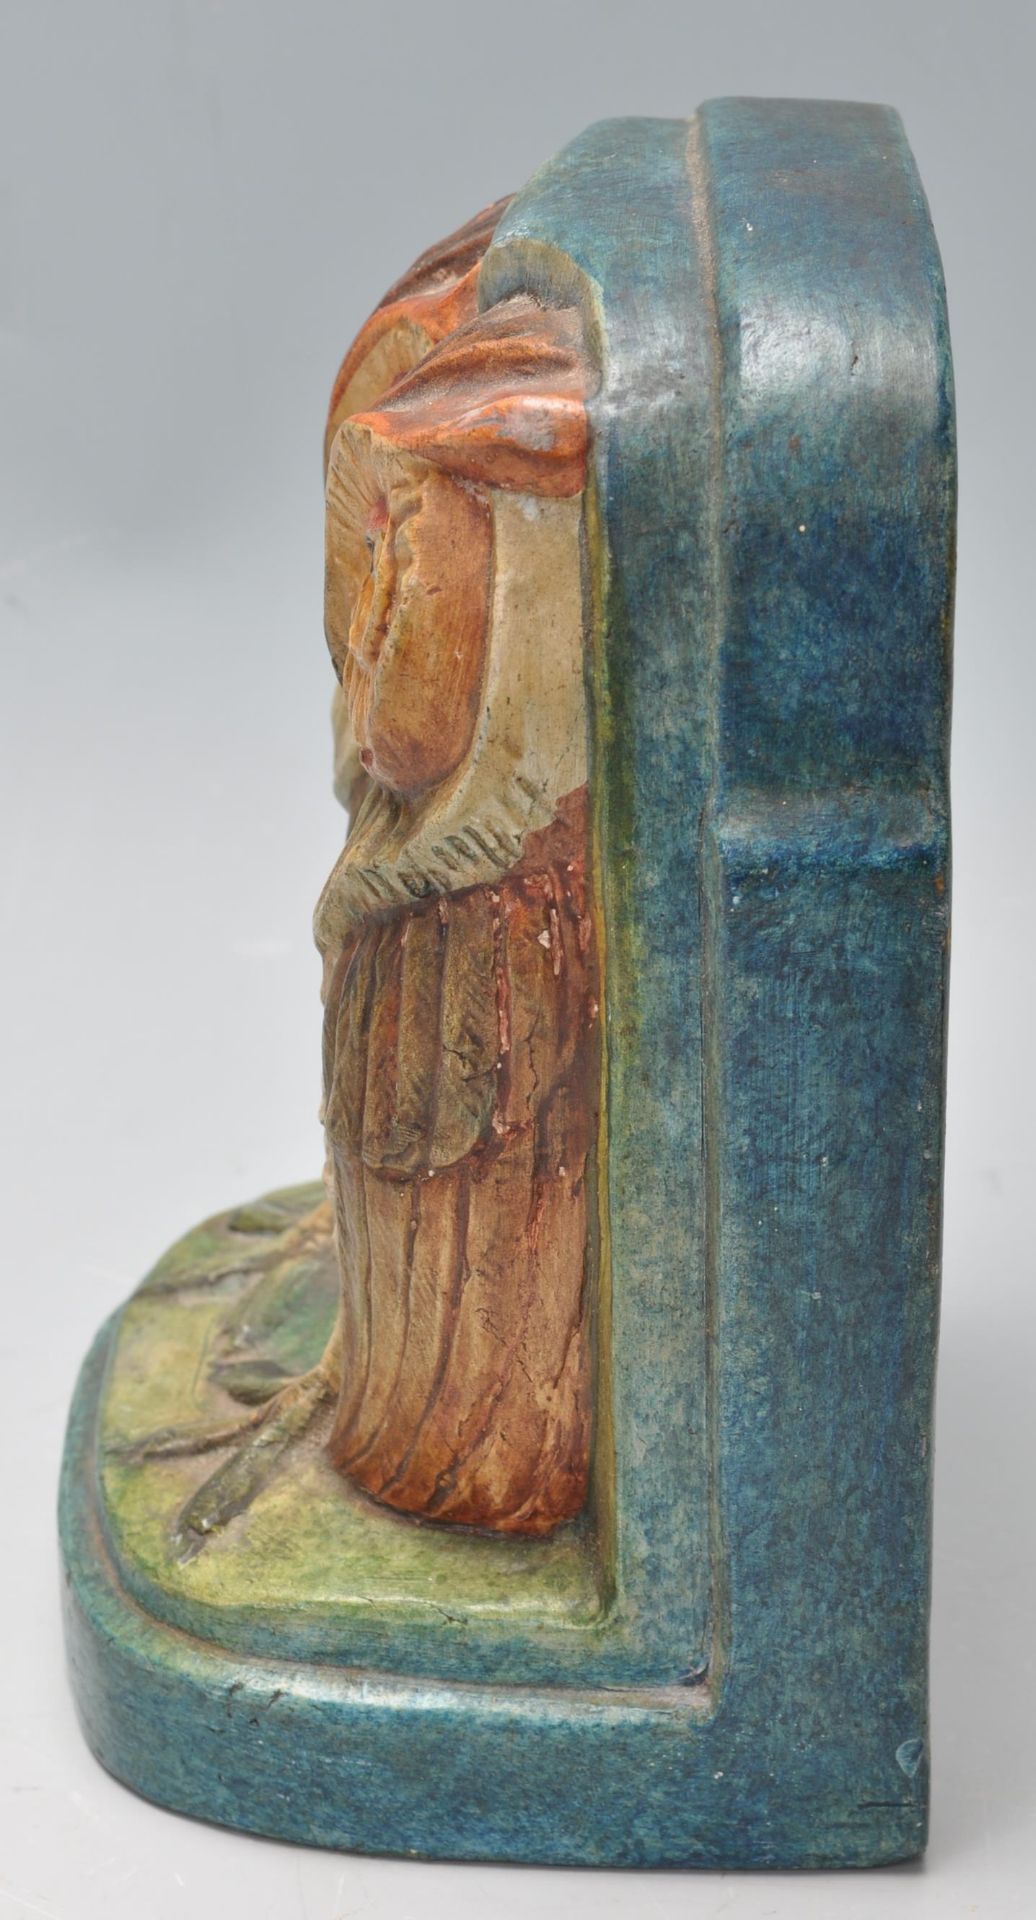 RARE EARLY 20TH CENTURY ARTS AND CRAFTS COMPTON POTTERY OWL BOOKEND - Image 2 of 7